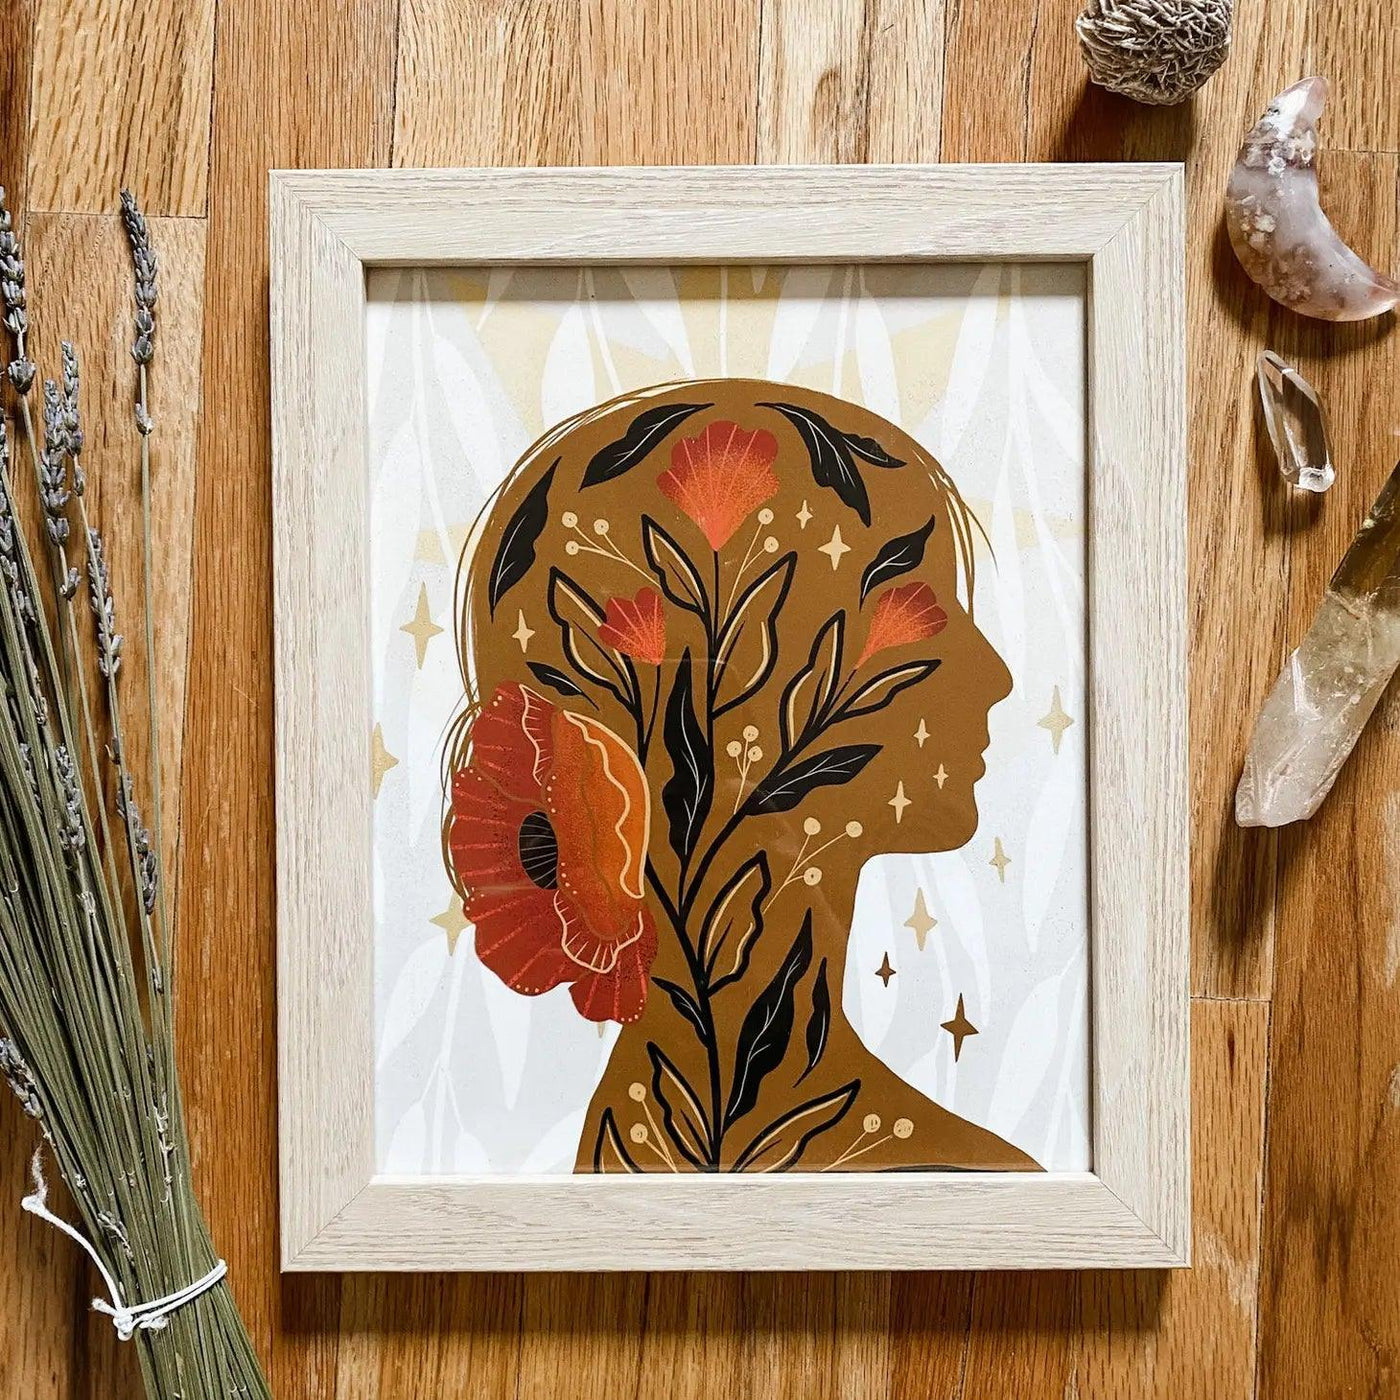 Room for Growth Art Print